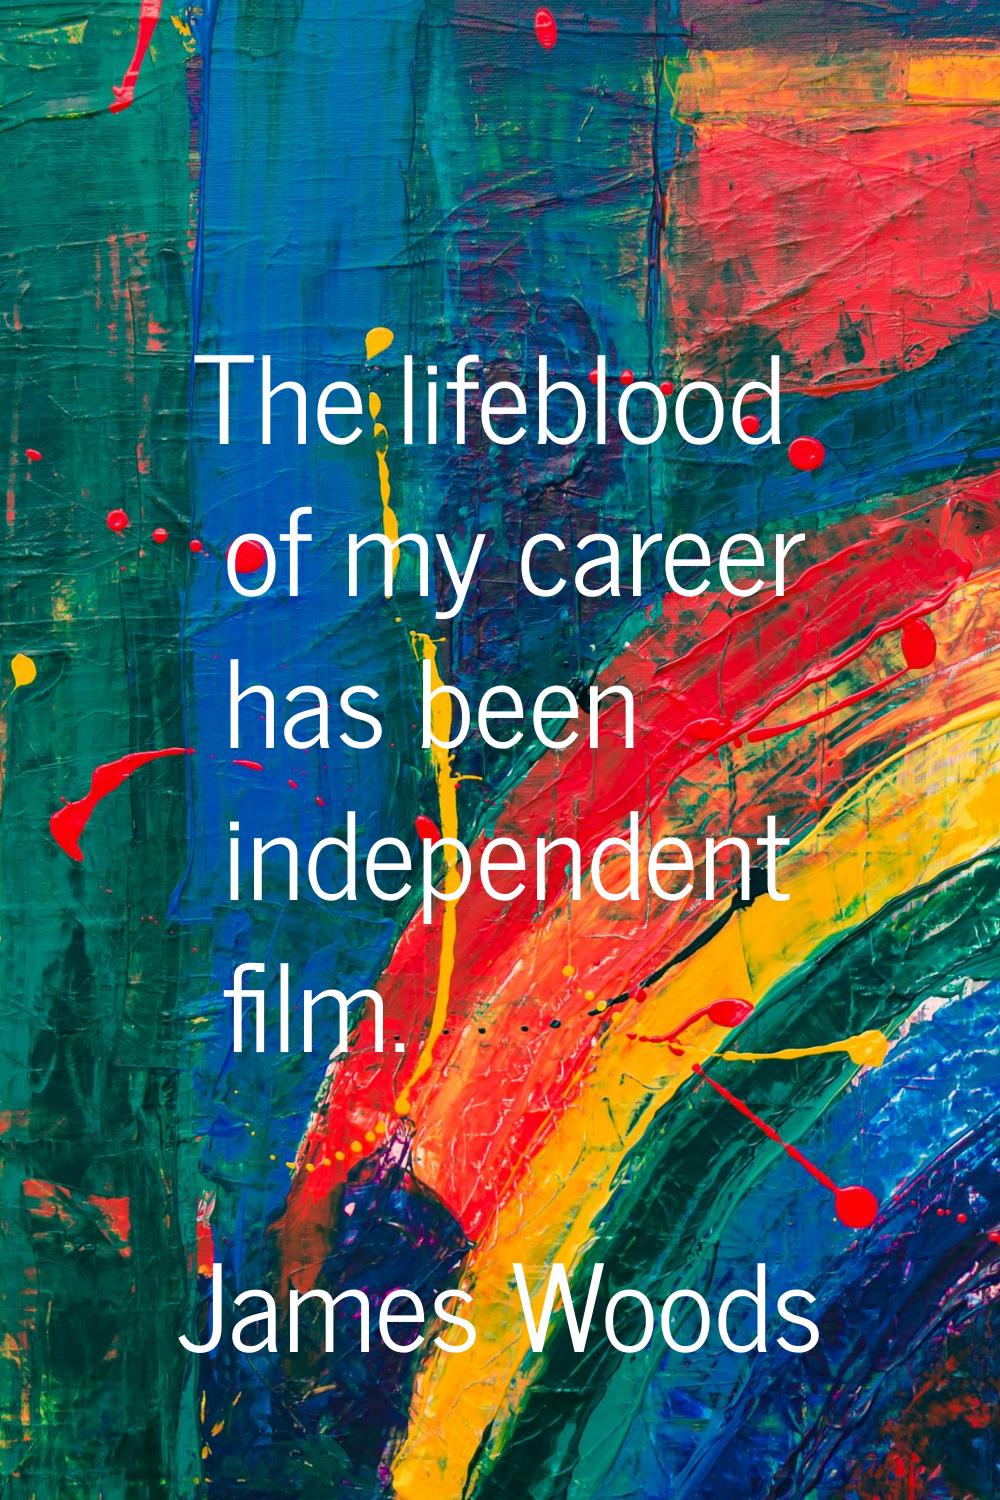 The lifeblood of my career has been independent film.